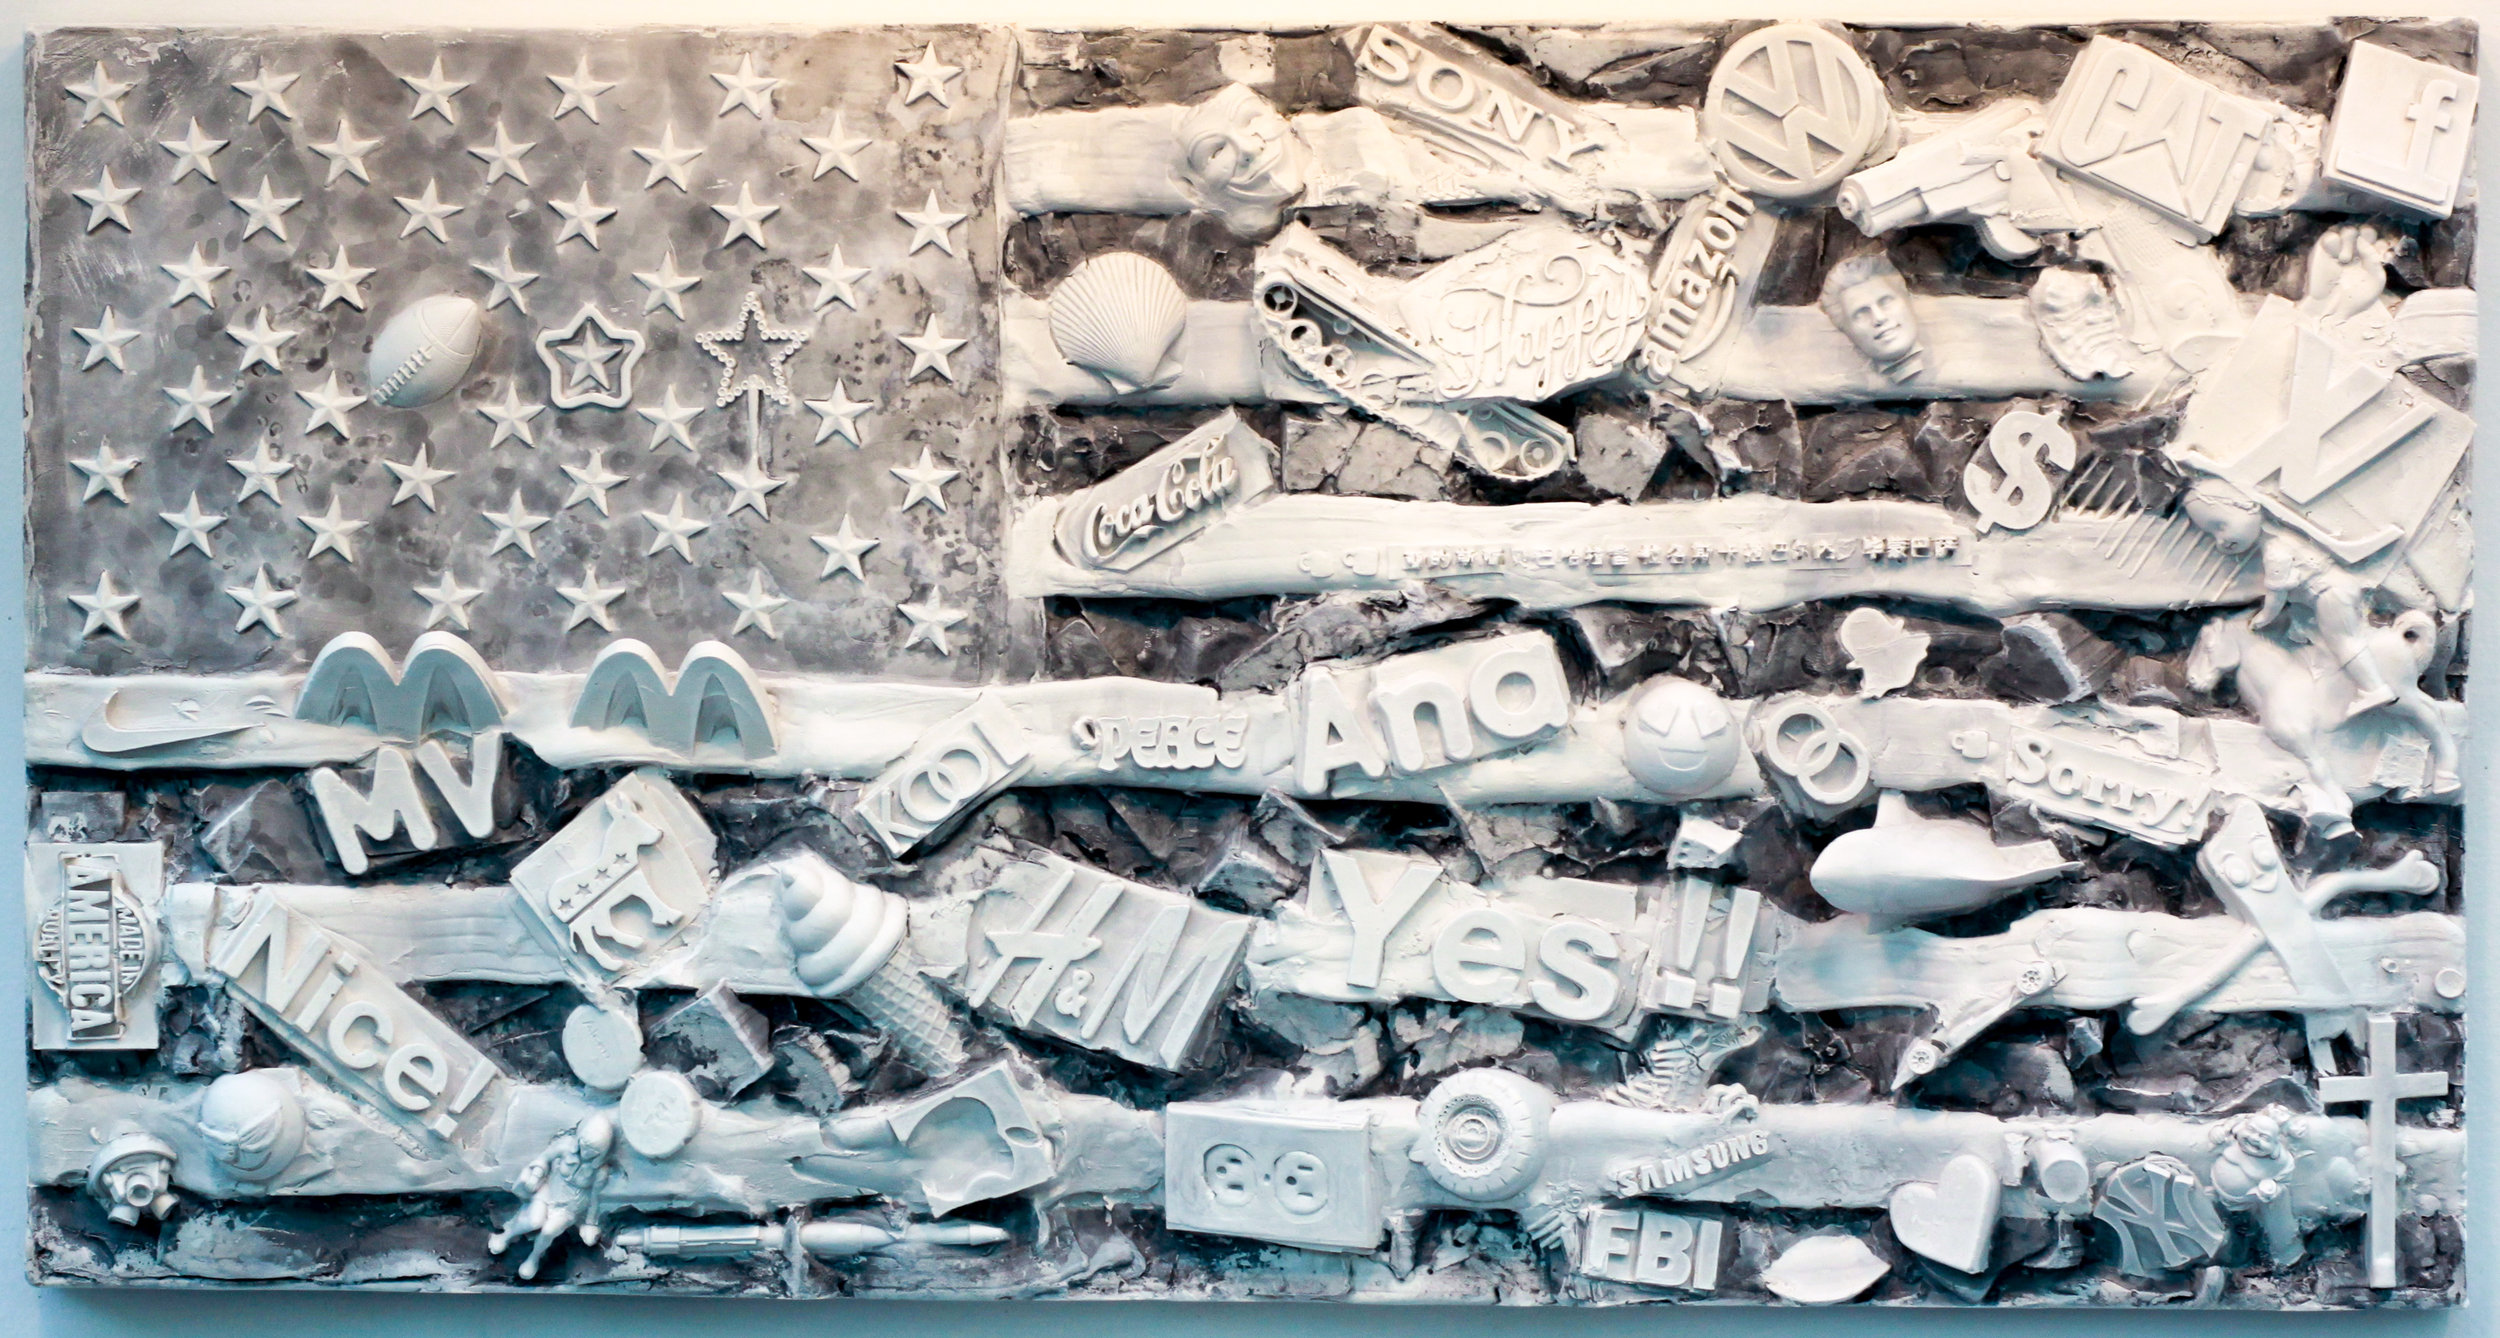  Shared Spaces- Mount Vernon, NY - Jan 2019, 18x34x4, hydrocal and Carrara marble, wall-mounted 